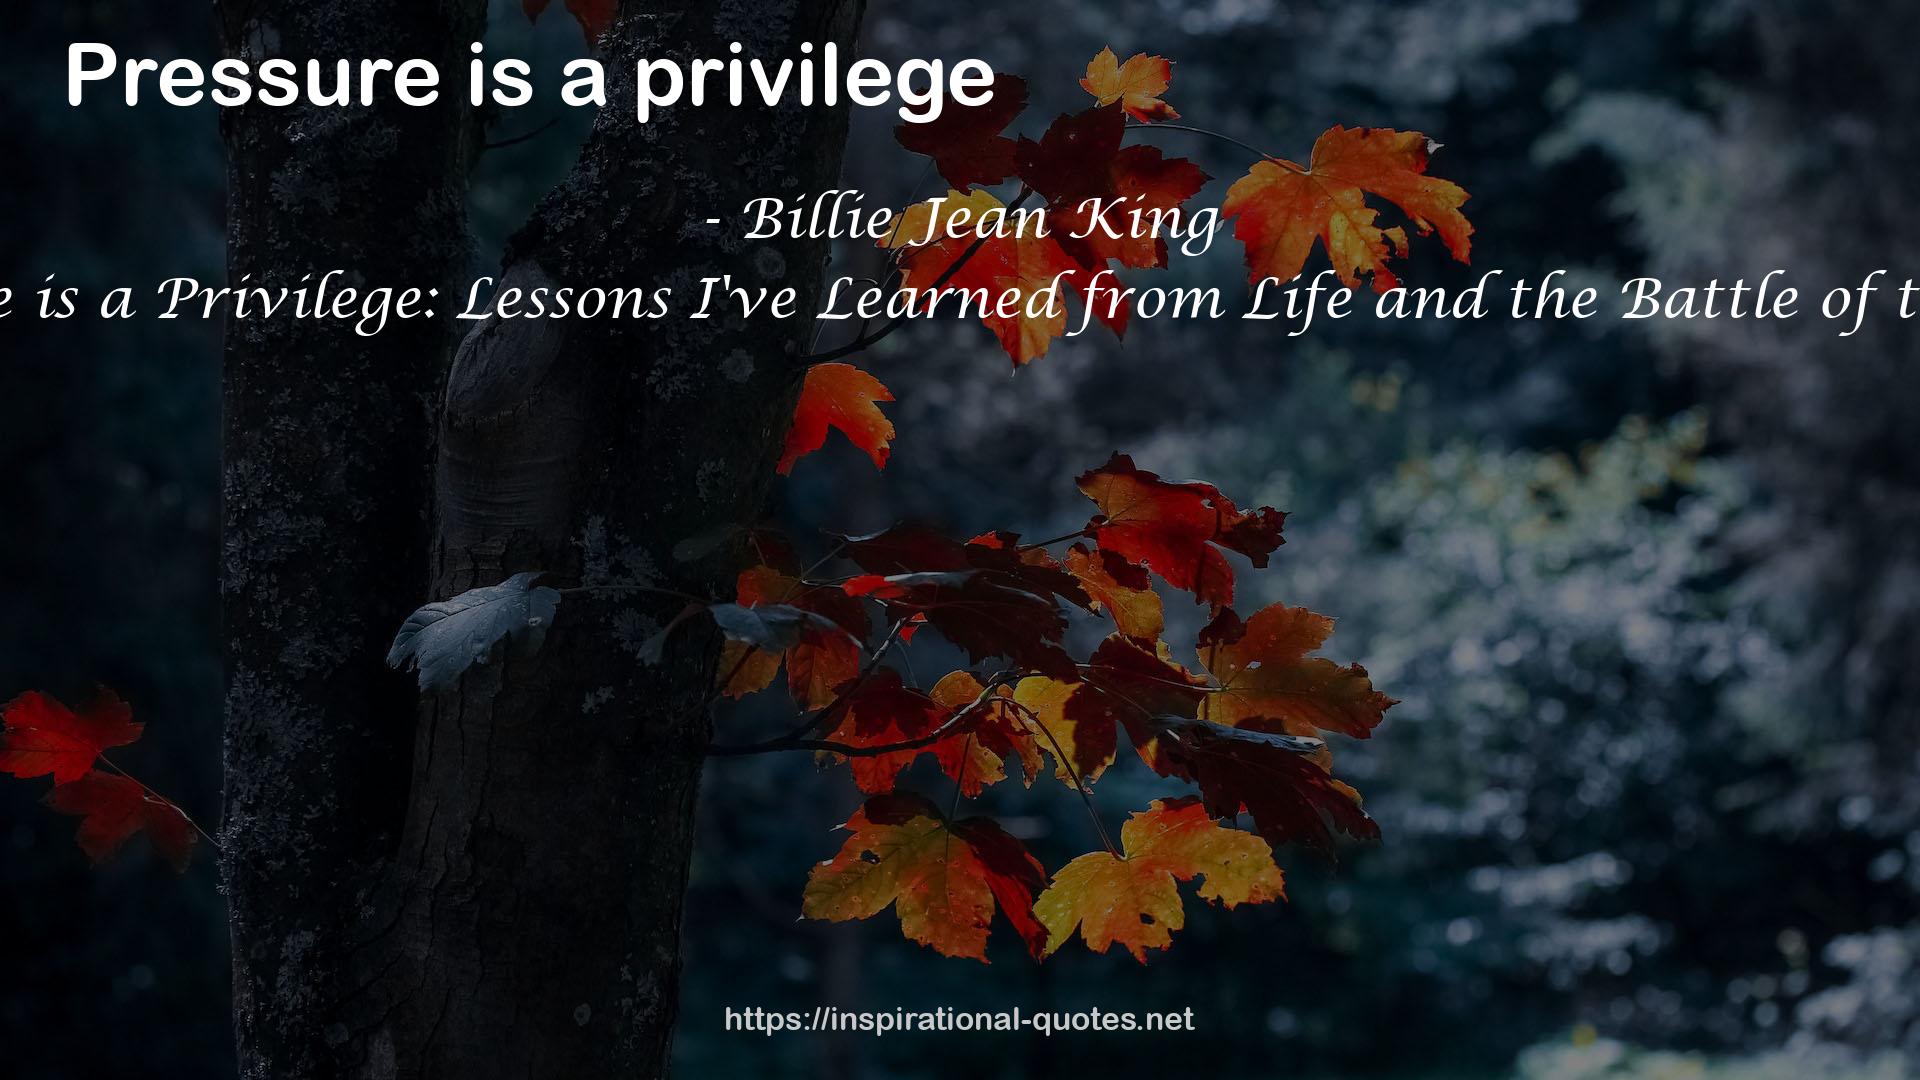 Pressure is a Privilege: Lessons I've Learned from Life and the Battle of the Sexes QUOTES